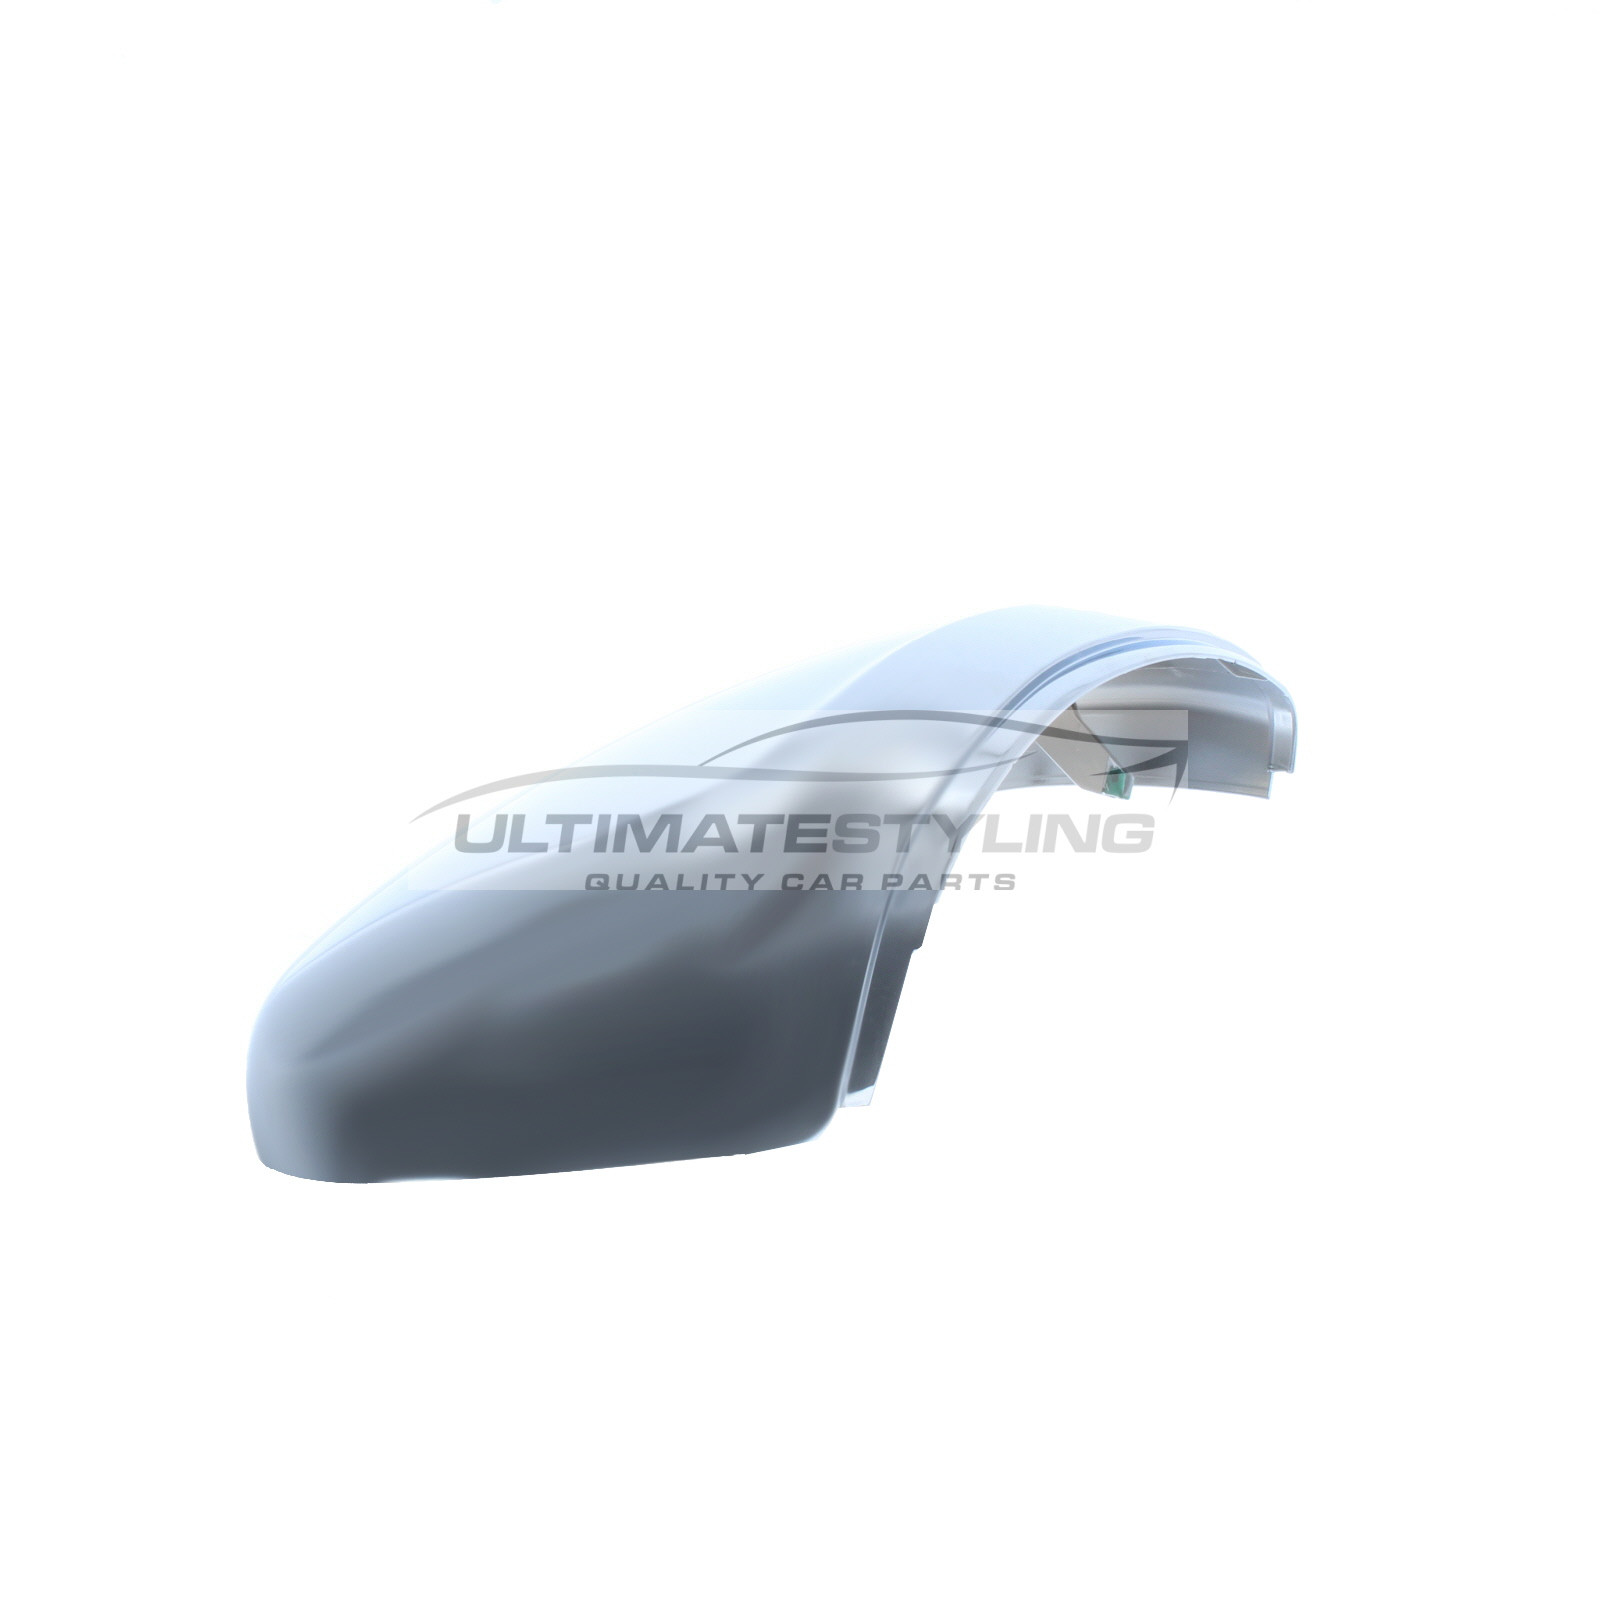 Peugeot 208 / 2008 Wing Mirror Cover - Drivers Side (RH) - Chrome Finish